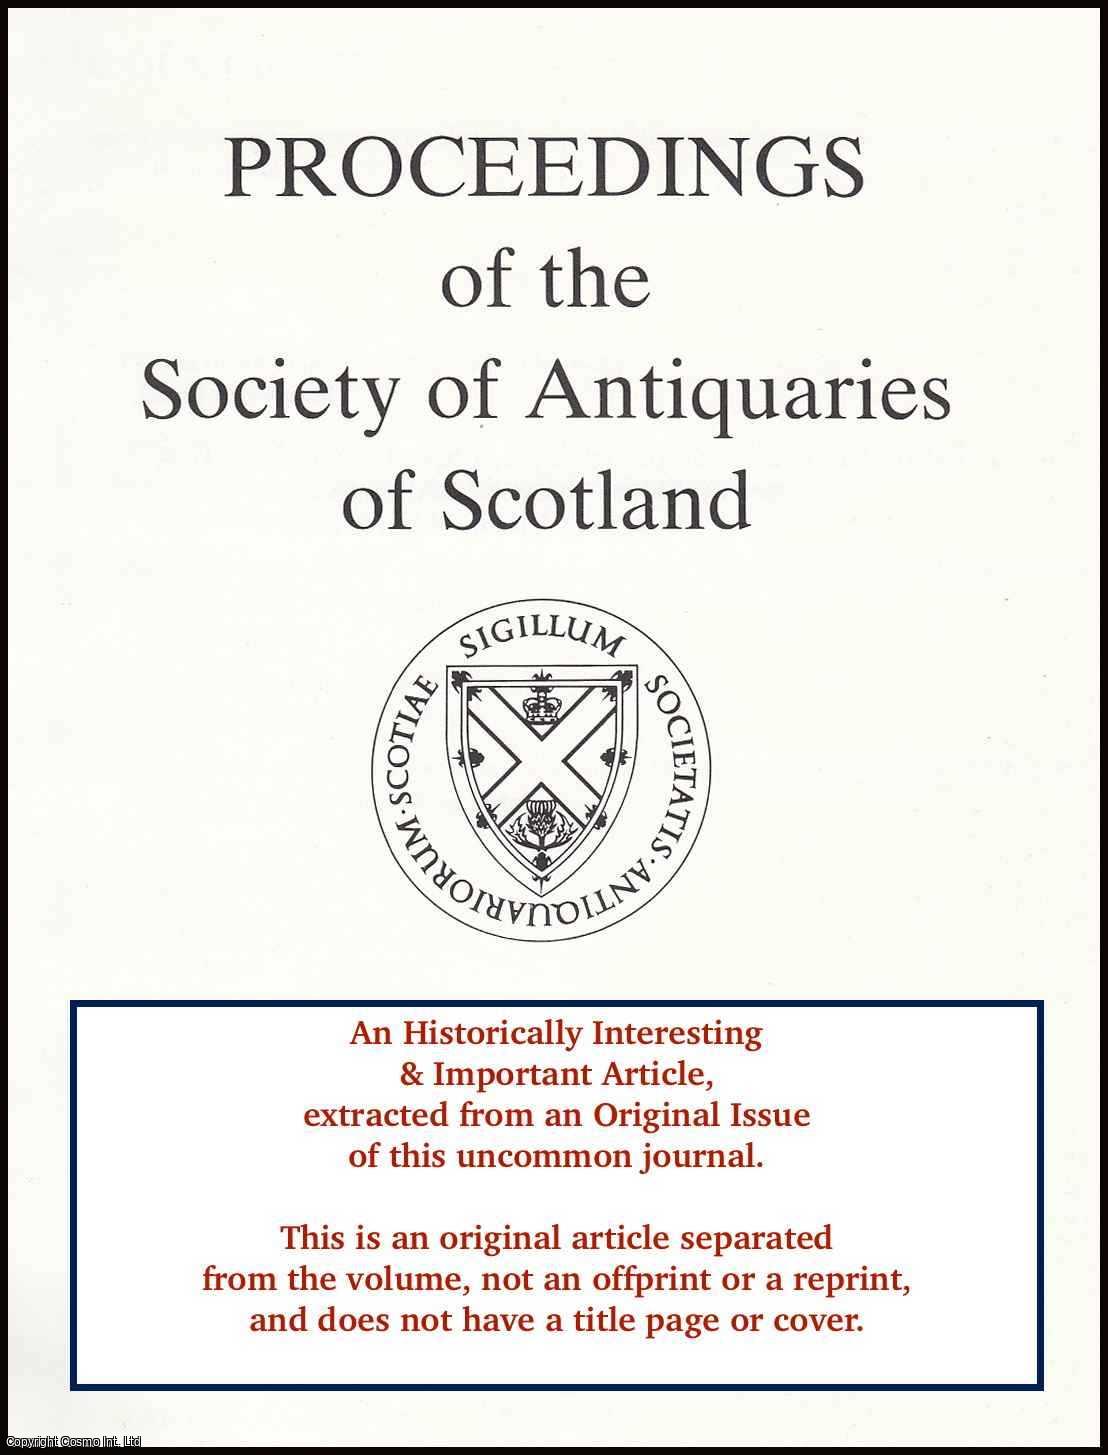 J. M. Joass - A Hoard of Bronze Vessels found, in 1868, near Helmsdale, Sutherland. An original article from the Proceedings of the Society of Antiquaries of Scotland, 1885-86.